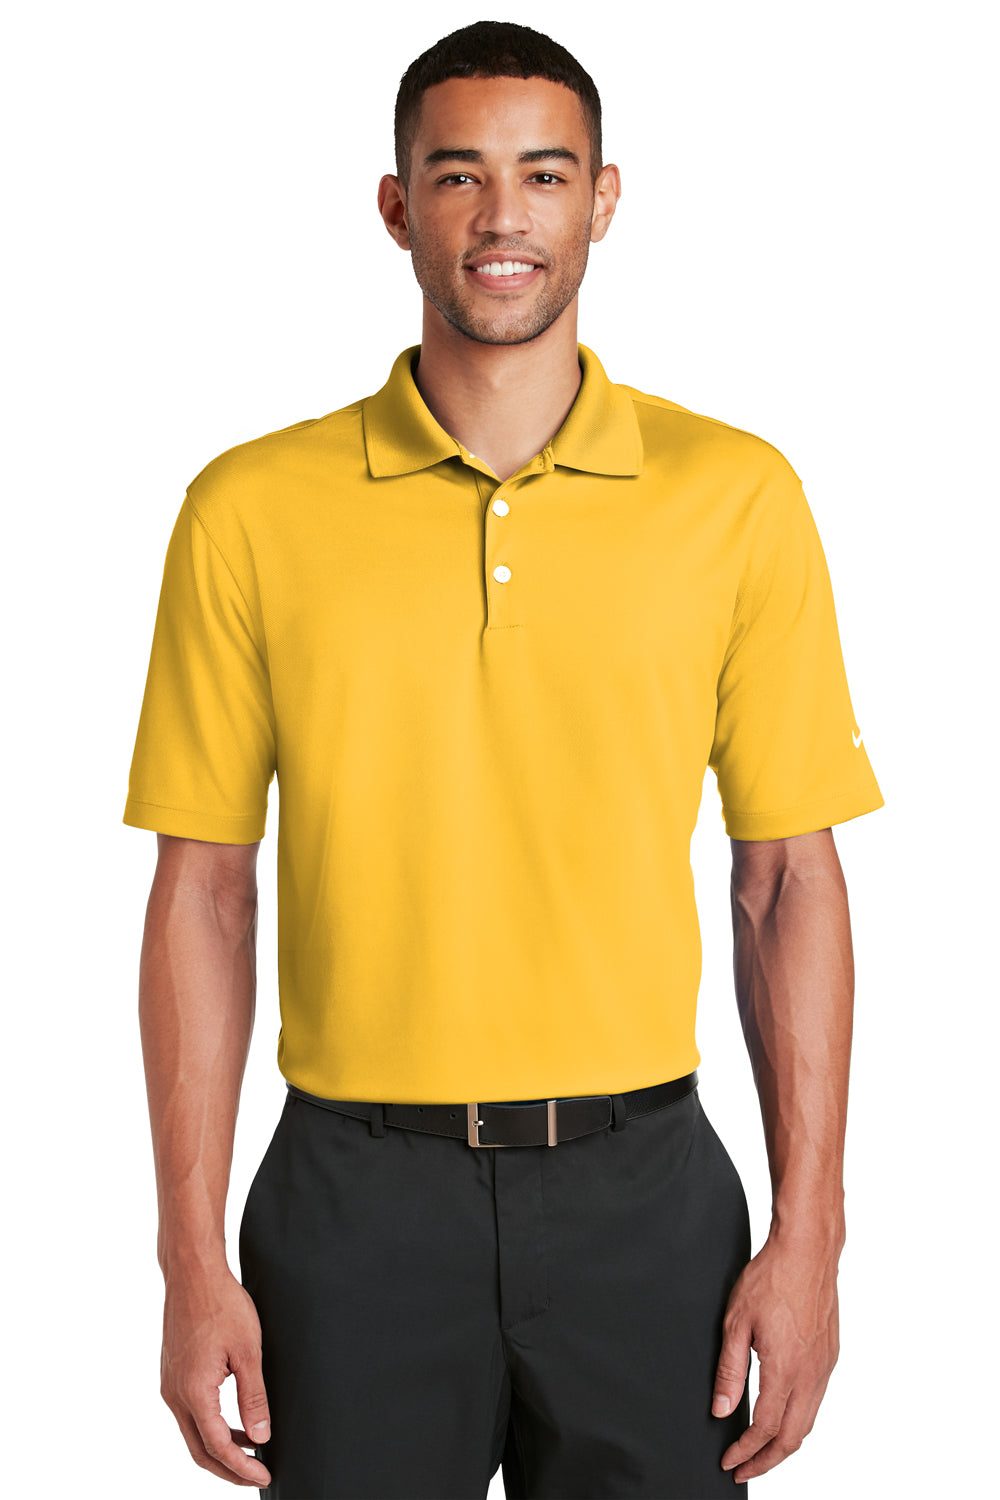 Nike 363807 Mens Dri-Fit Moisture Wicking Short Sleeve Polo Shirt Gold Front